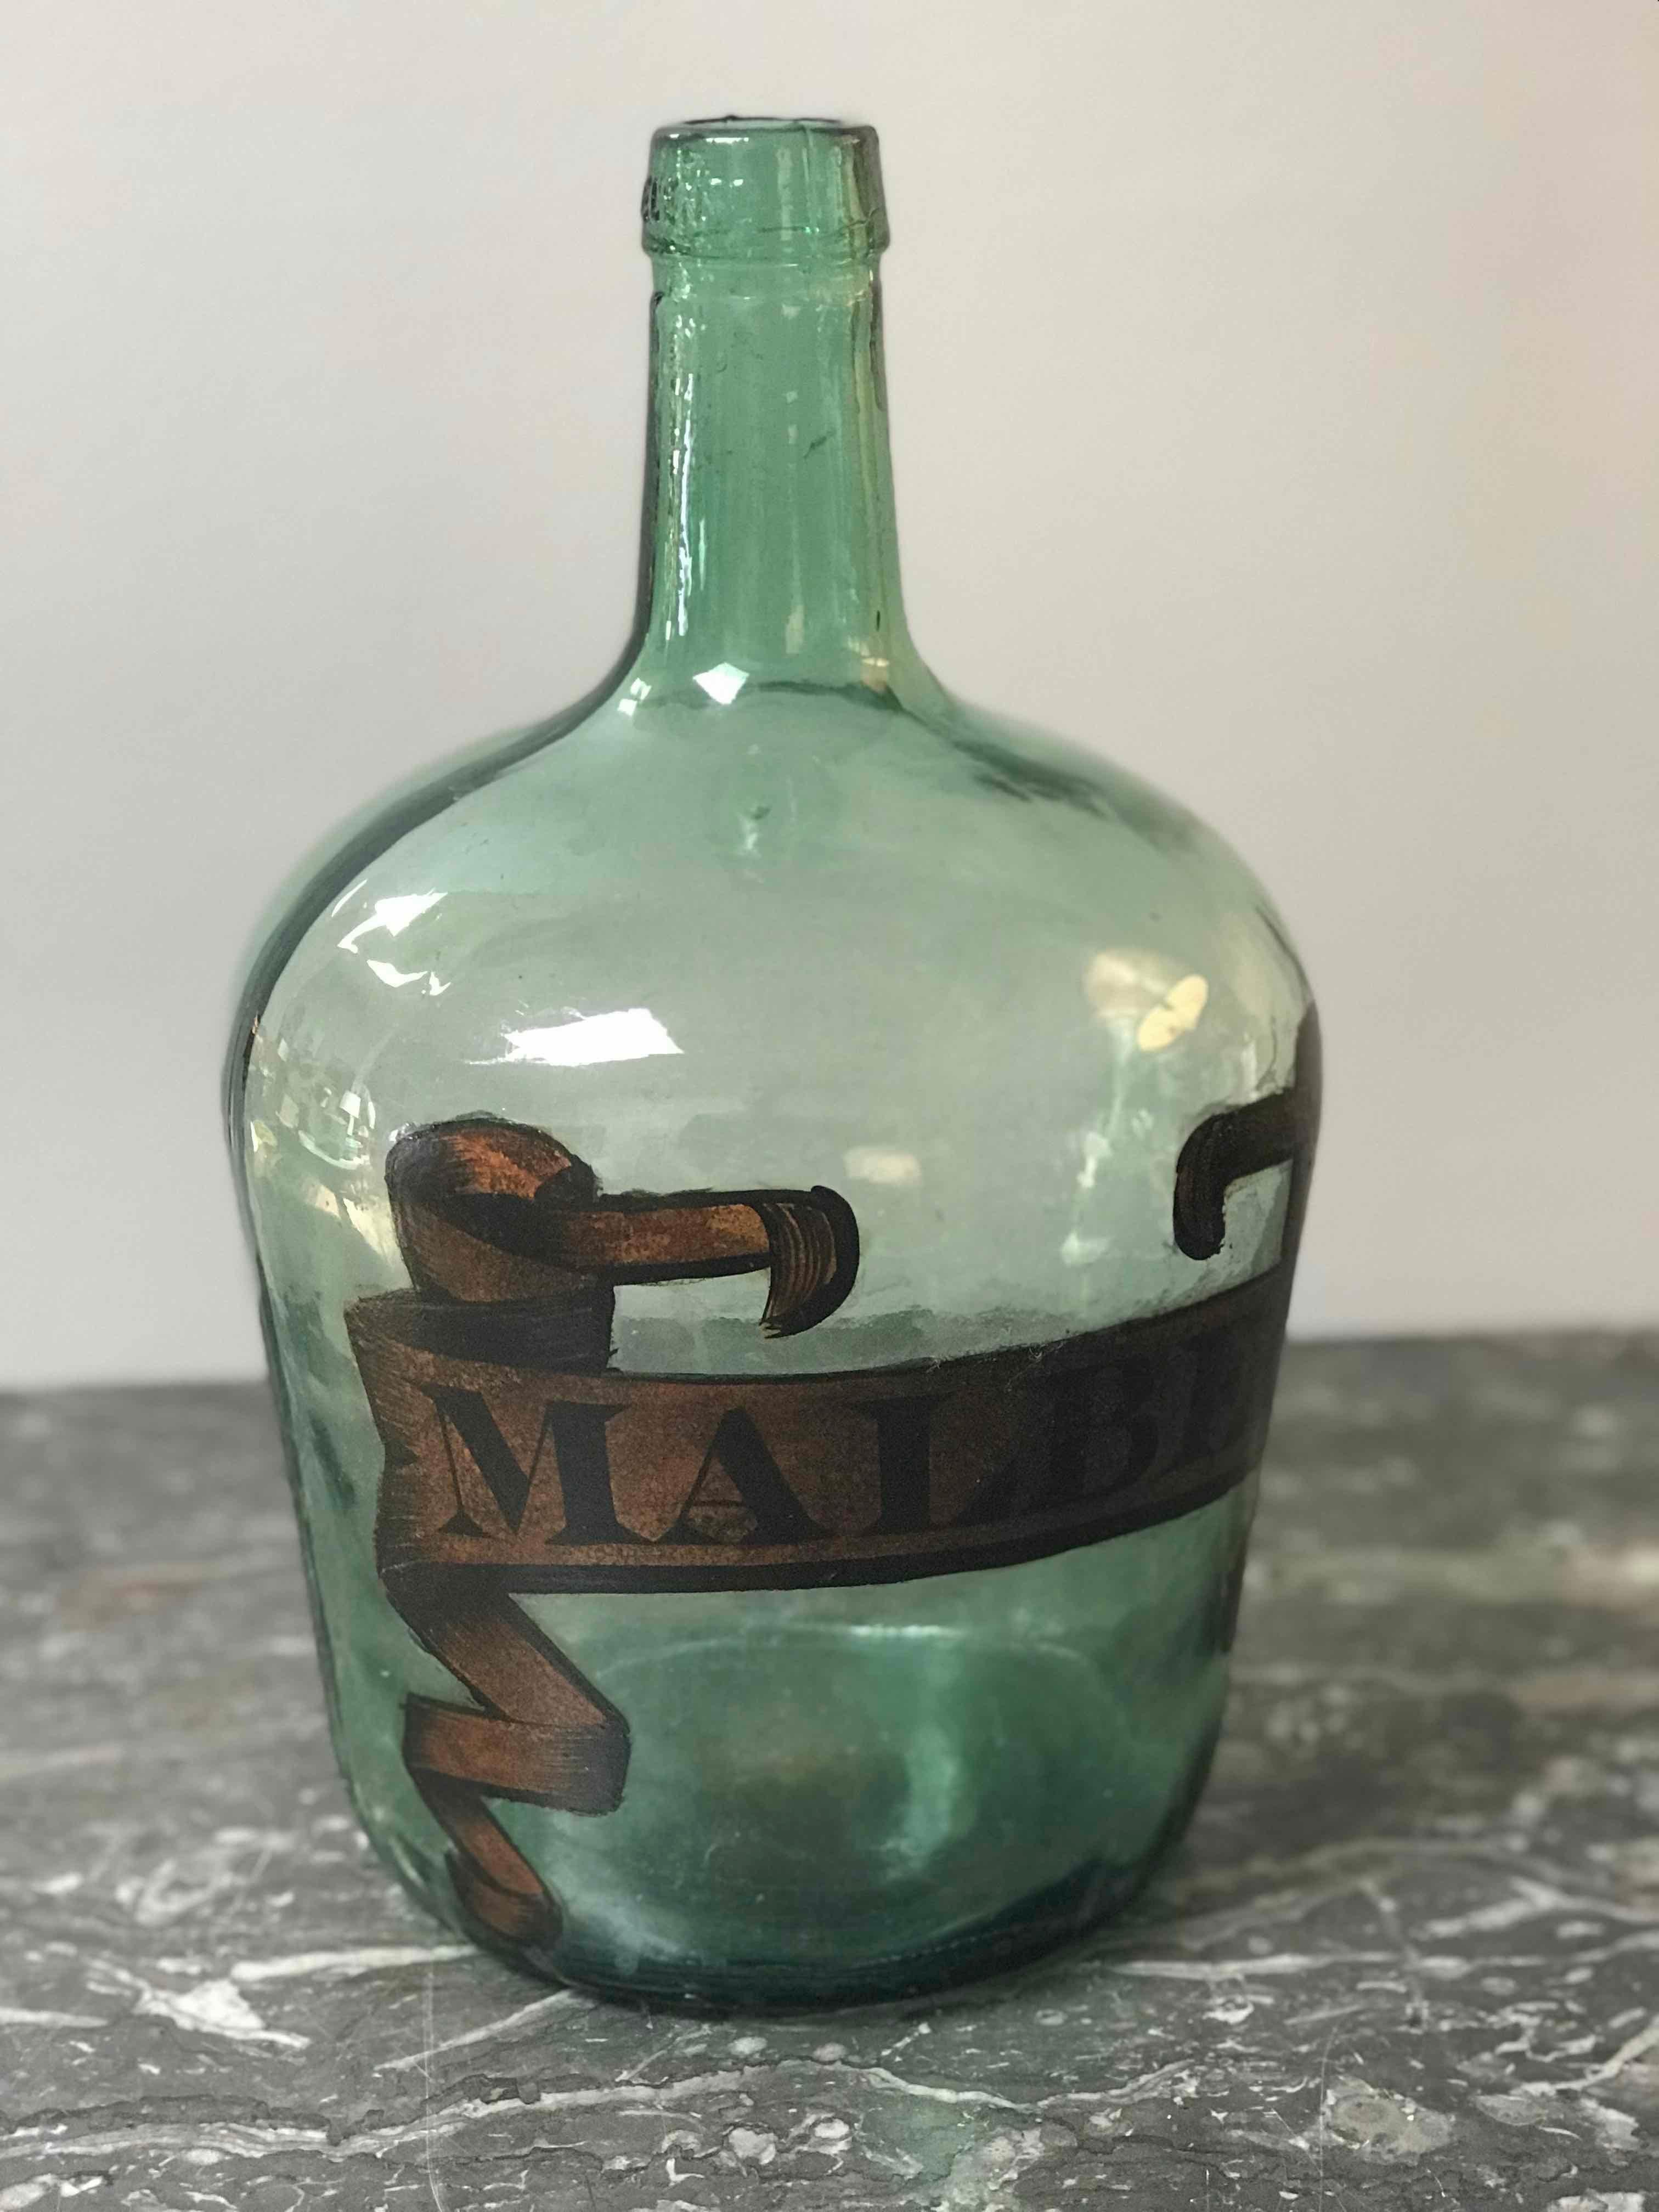 Early 20th century France green blown glass bottle with Malbec label. Perfect for serving dinner wine to guests or decorative accent piece.  